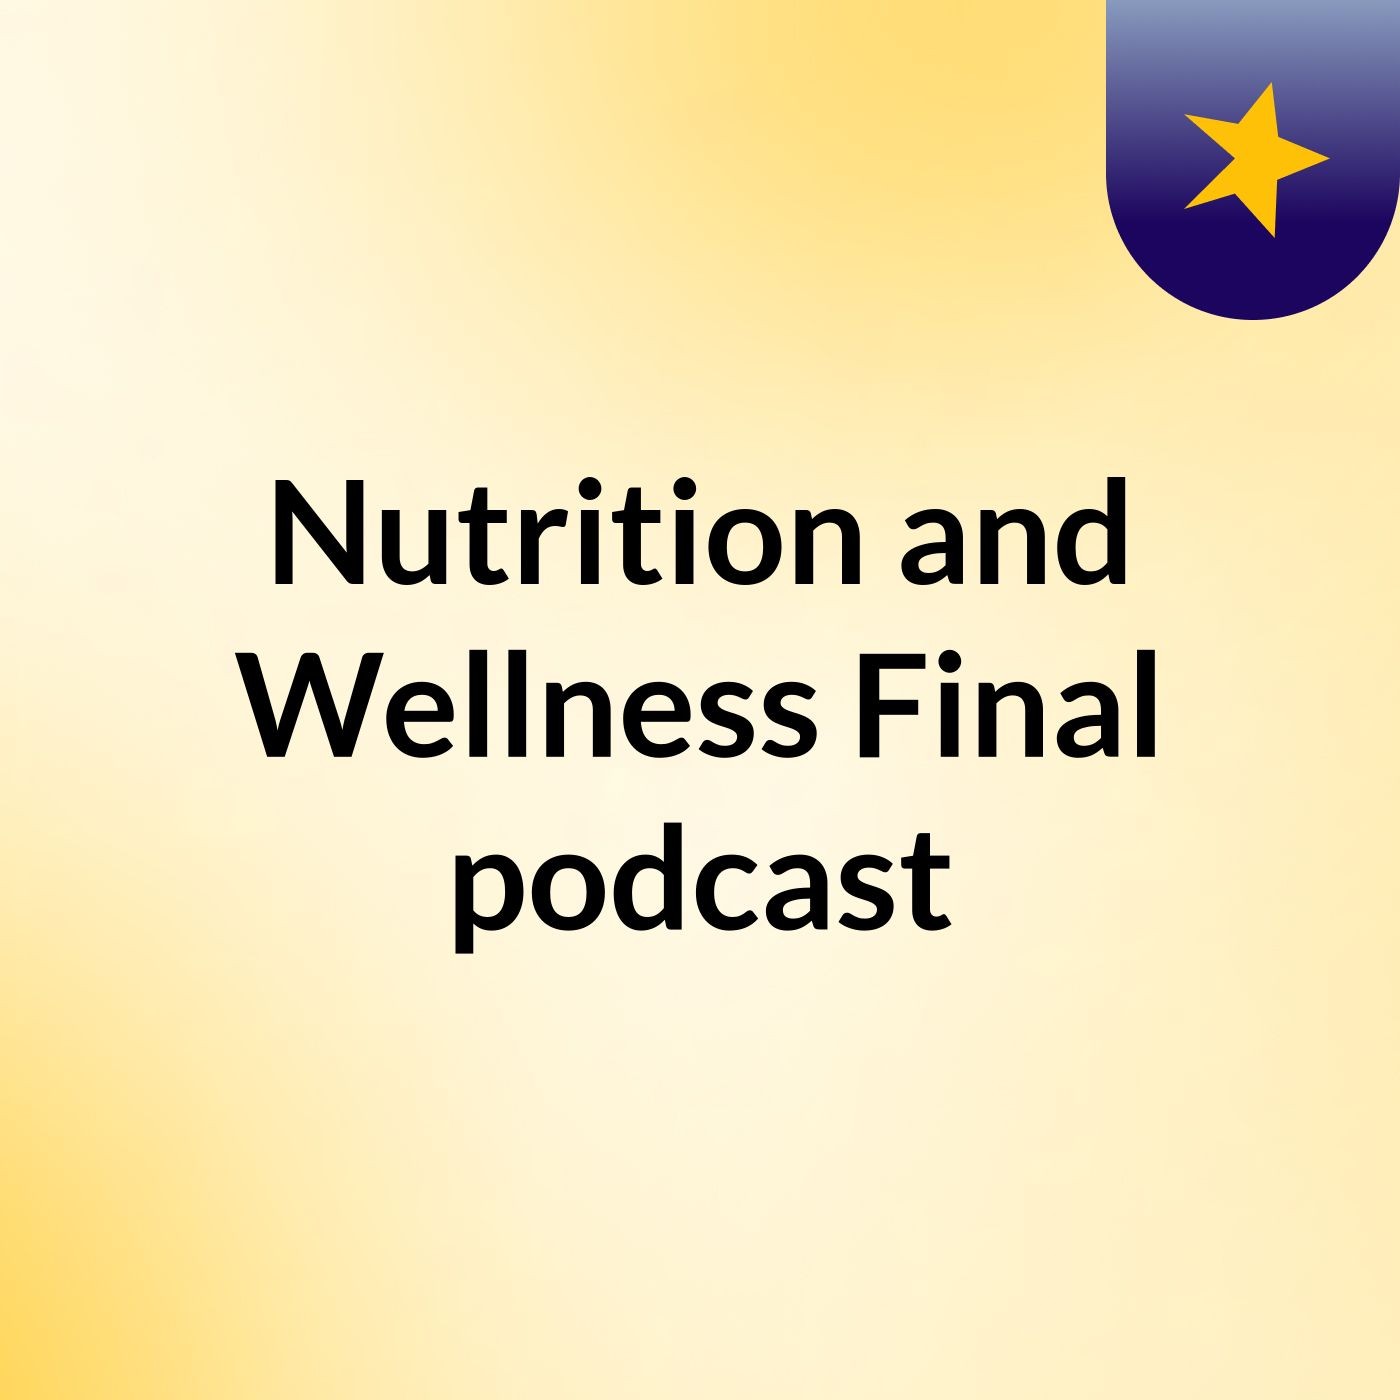 Nutrition and Wellness Final podcast